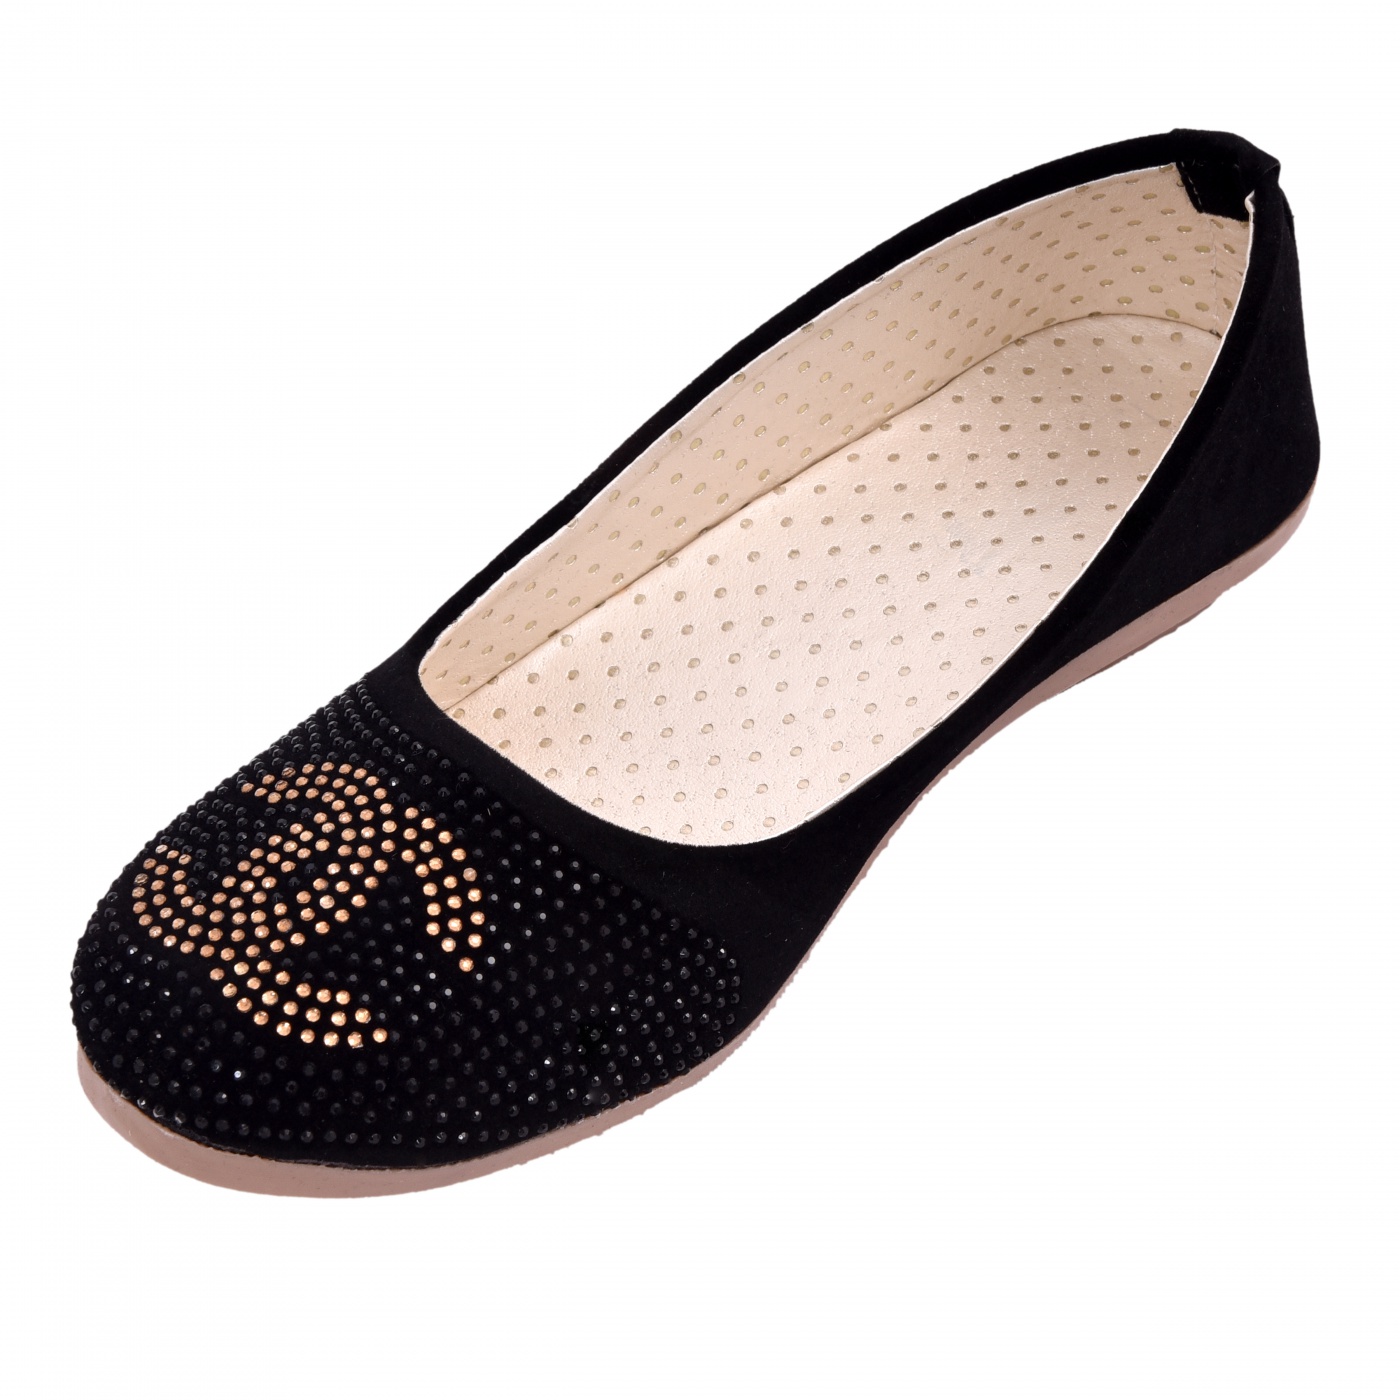 Belly Shoes - National Handloom Corporation